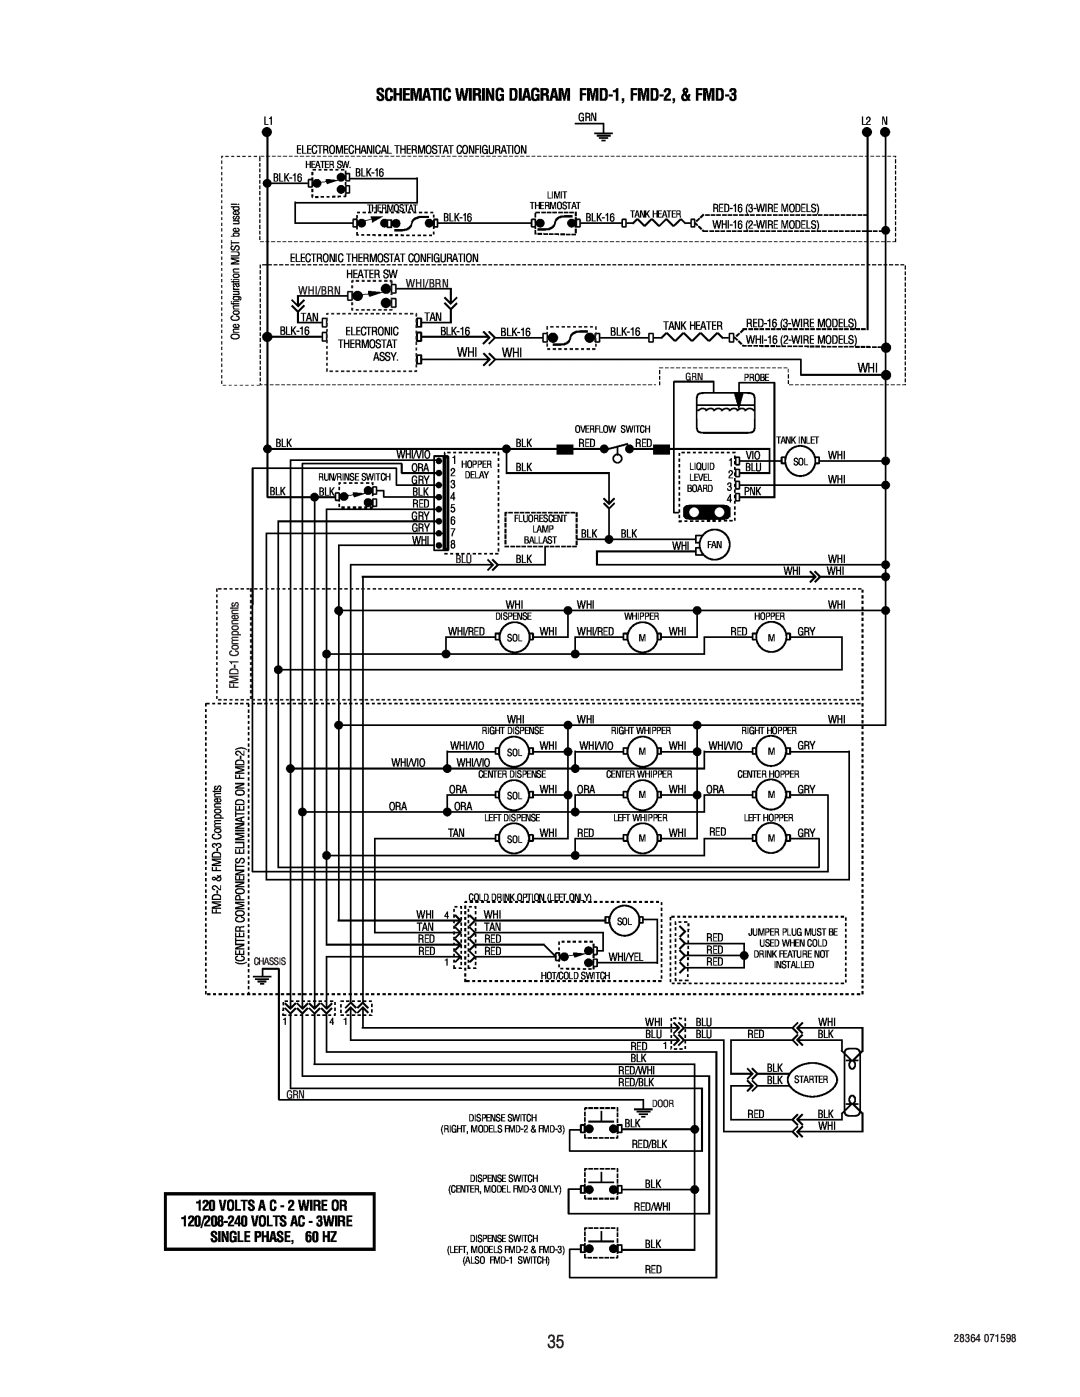 Bunn SCHEMATIC WIRING DIAGRAM FMD-1, FMD-2,& FMD-3, Single Phase, VOLTS A C - 2 WIRE OR, FMD-1Components, Whi/Brn 